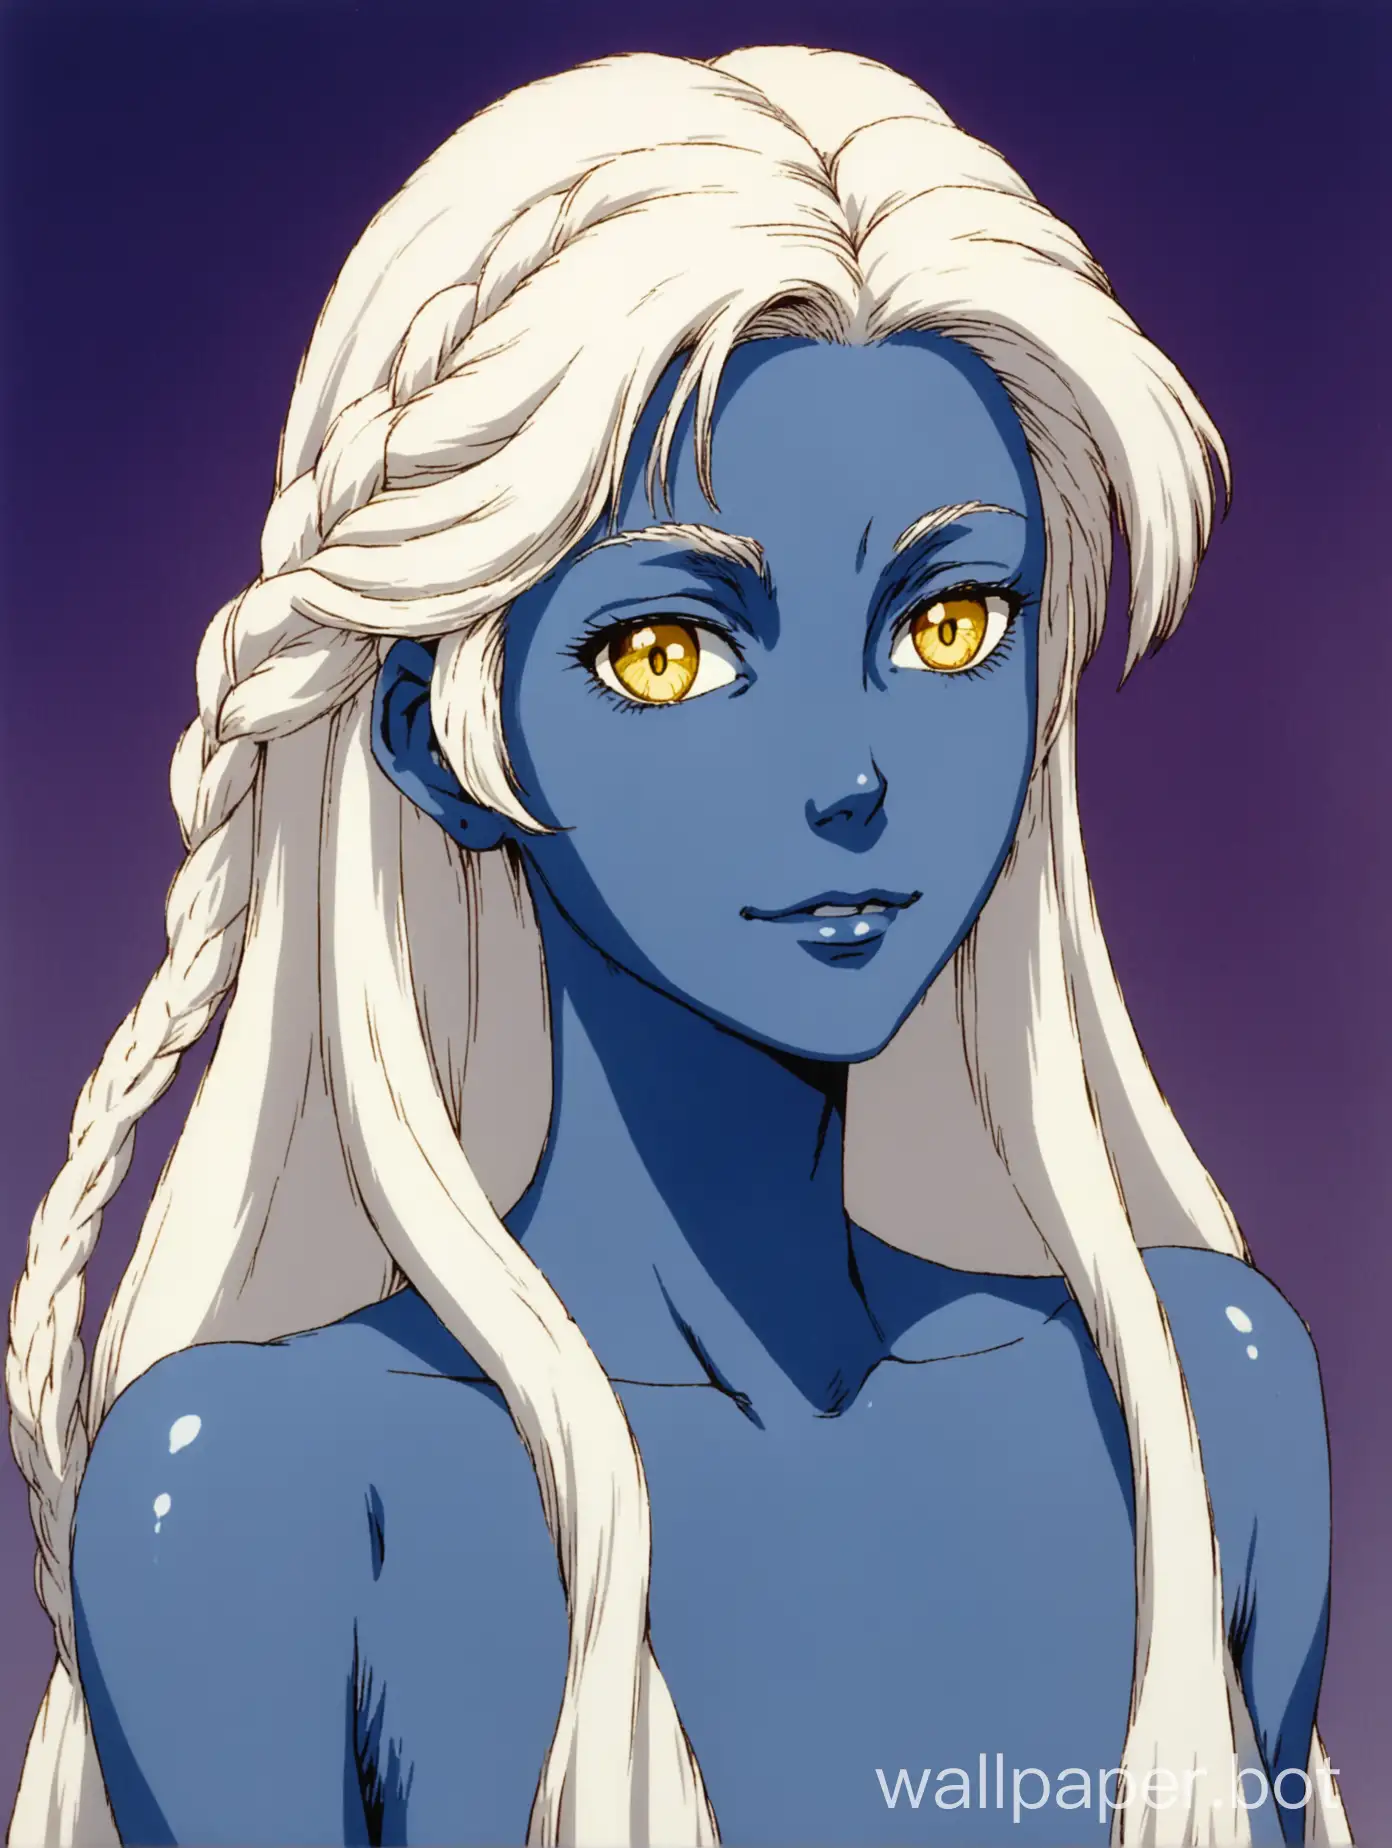 1980s-Retro-Anime-Portrait-of-a-Regal-Young-Woman-with-Blue-Skin-and-White-Hair